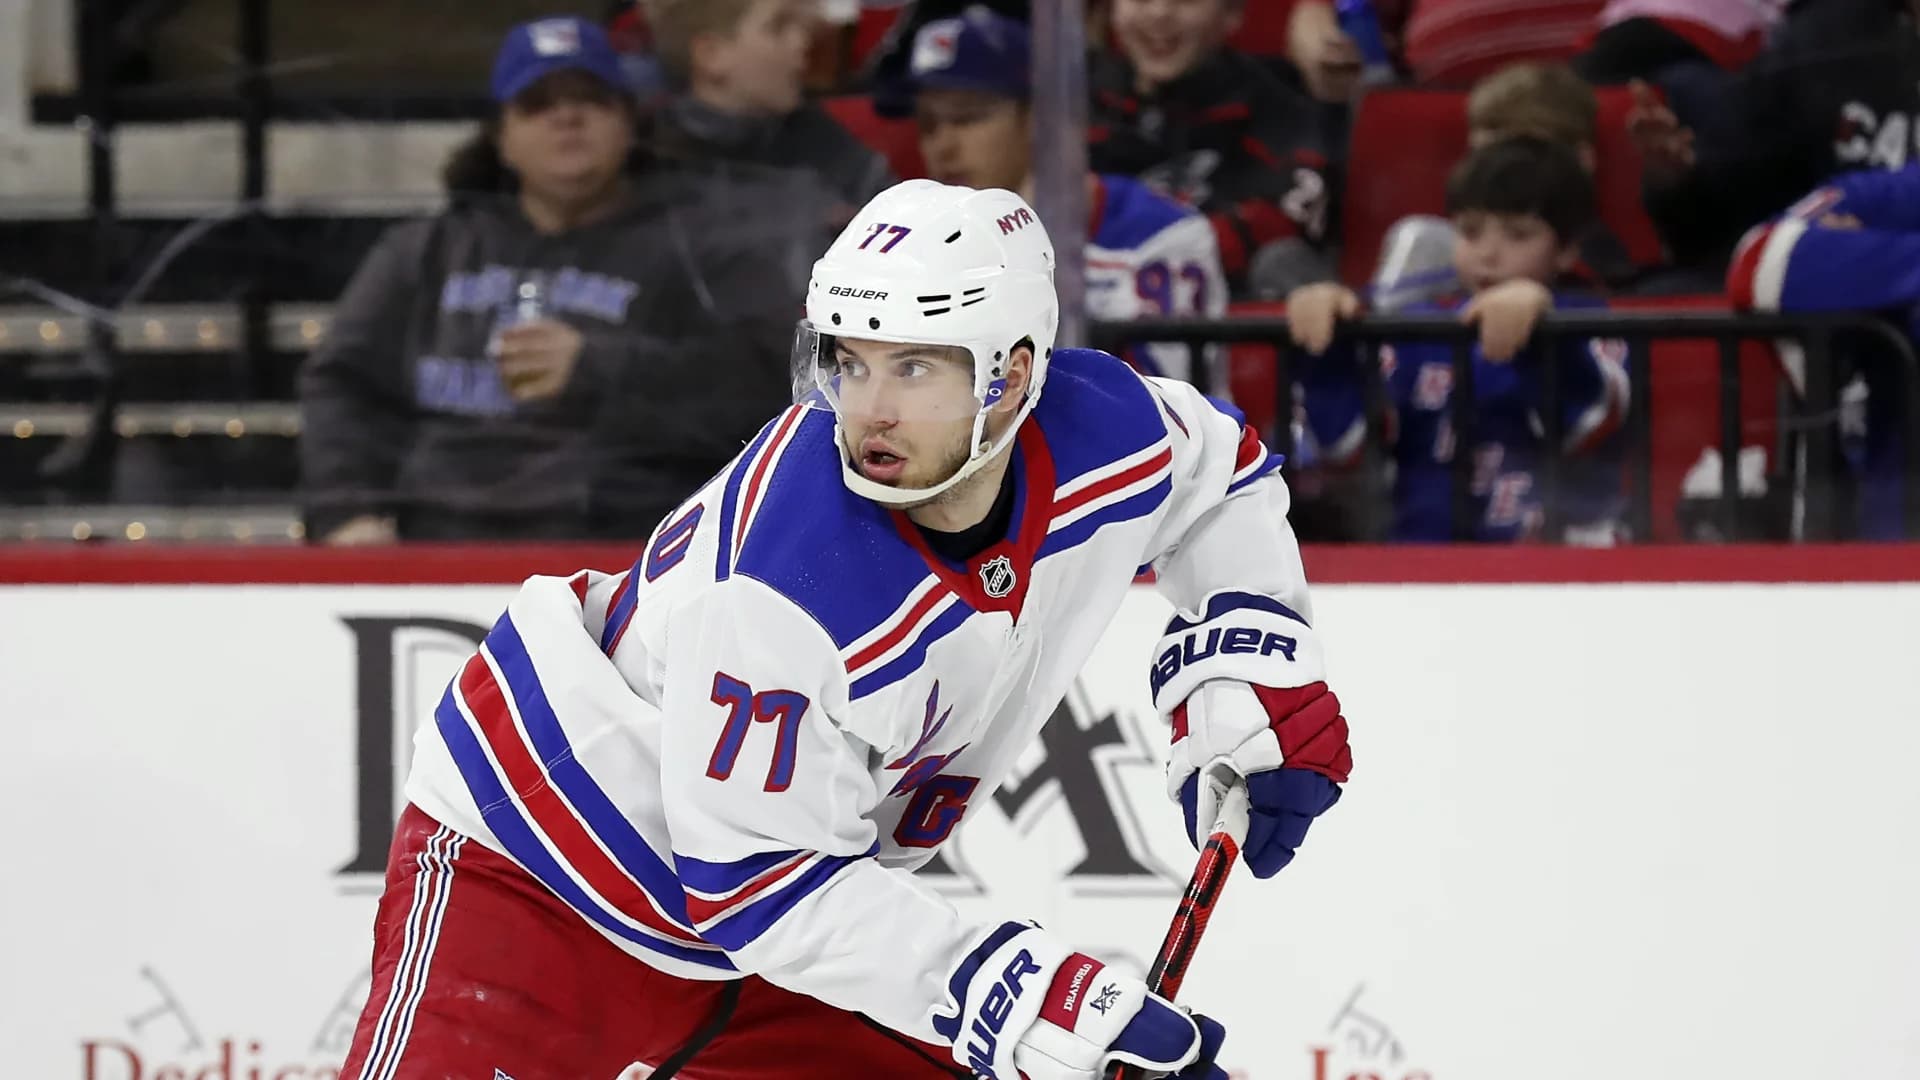 Tony DeAngelo 'has played his last game' for NY Rangers, GM says